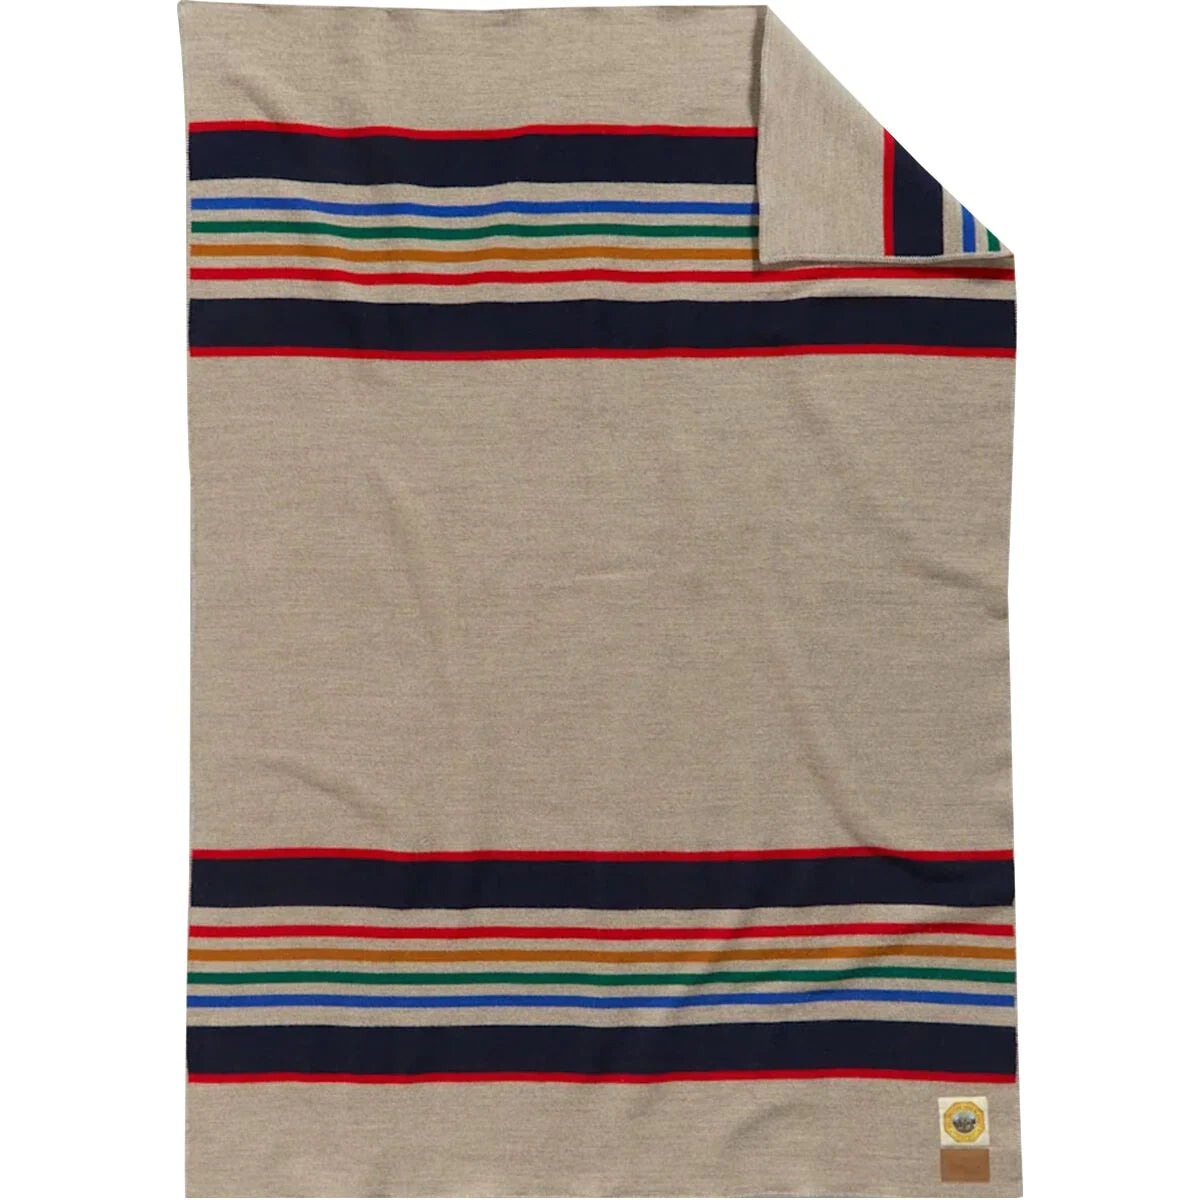 National Park Full Blanket in Yellowstone in Taupe view of blanket